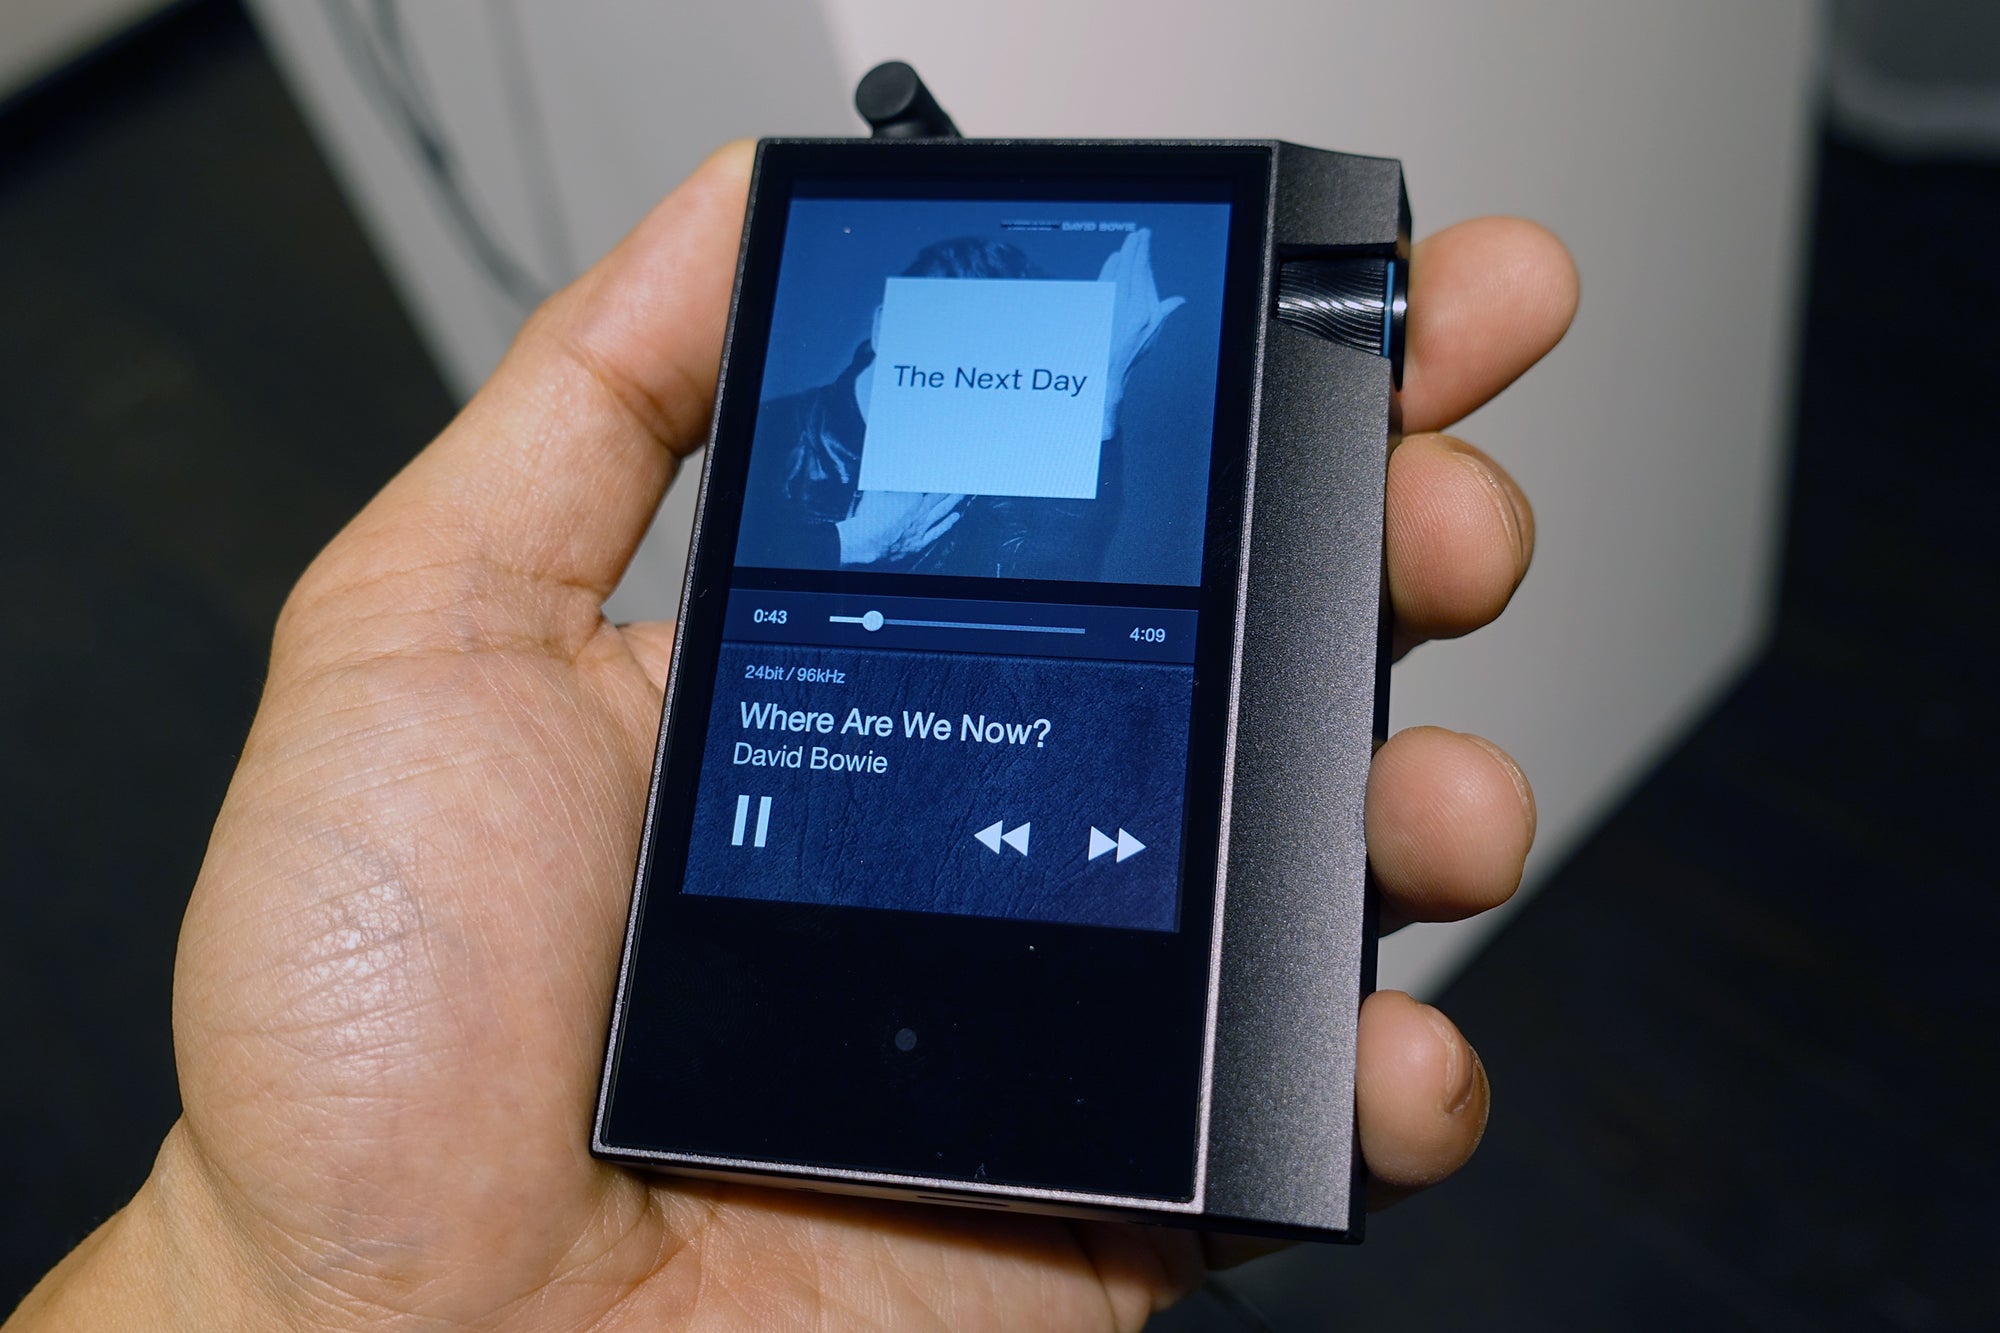 Astell & Kern AK70 MKII hands-on Review | Trusted Reviews